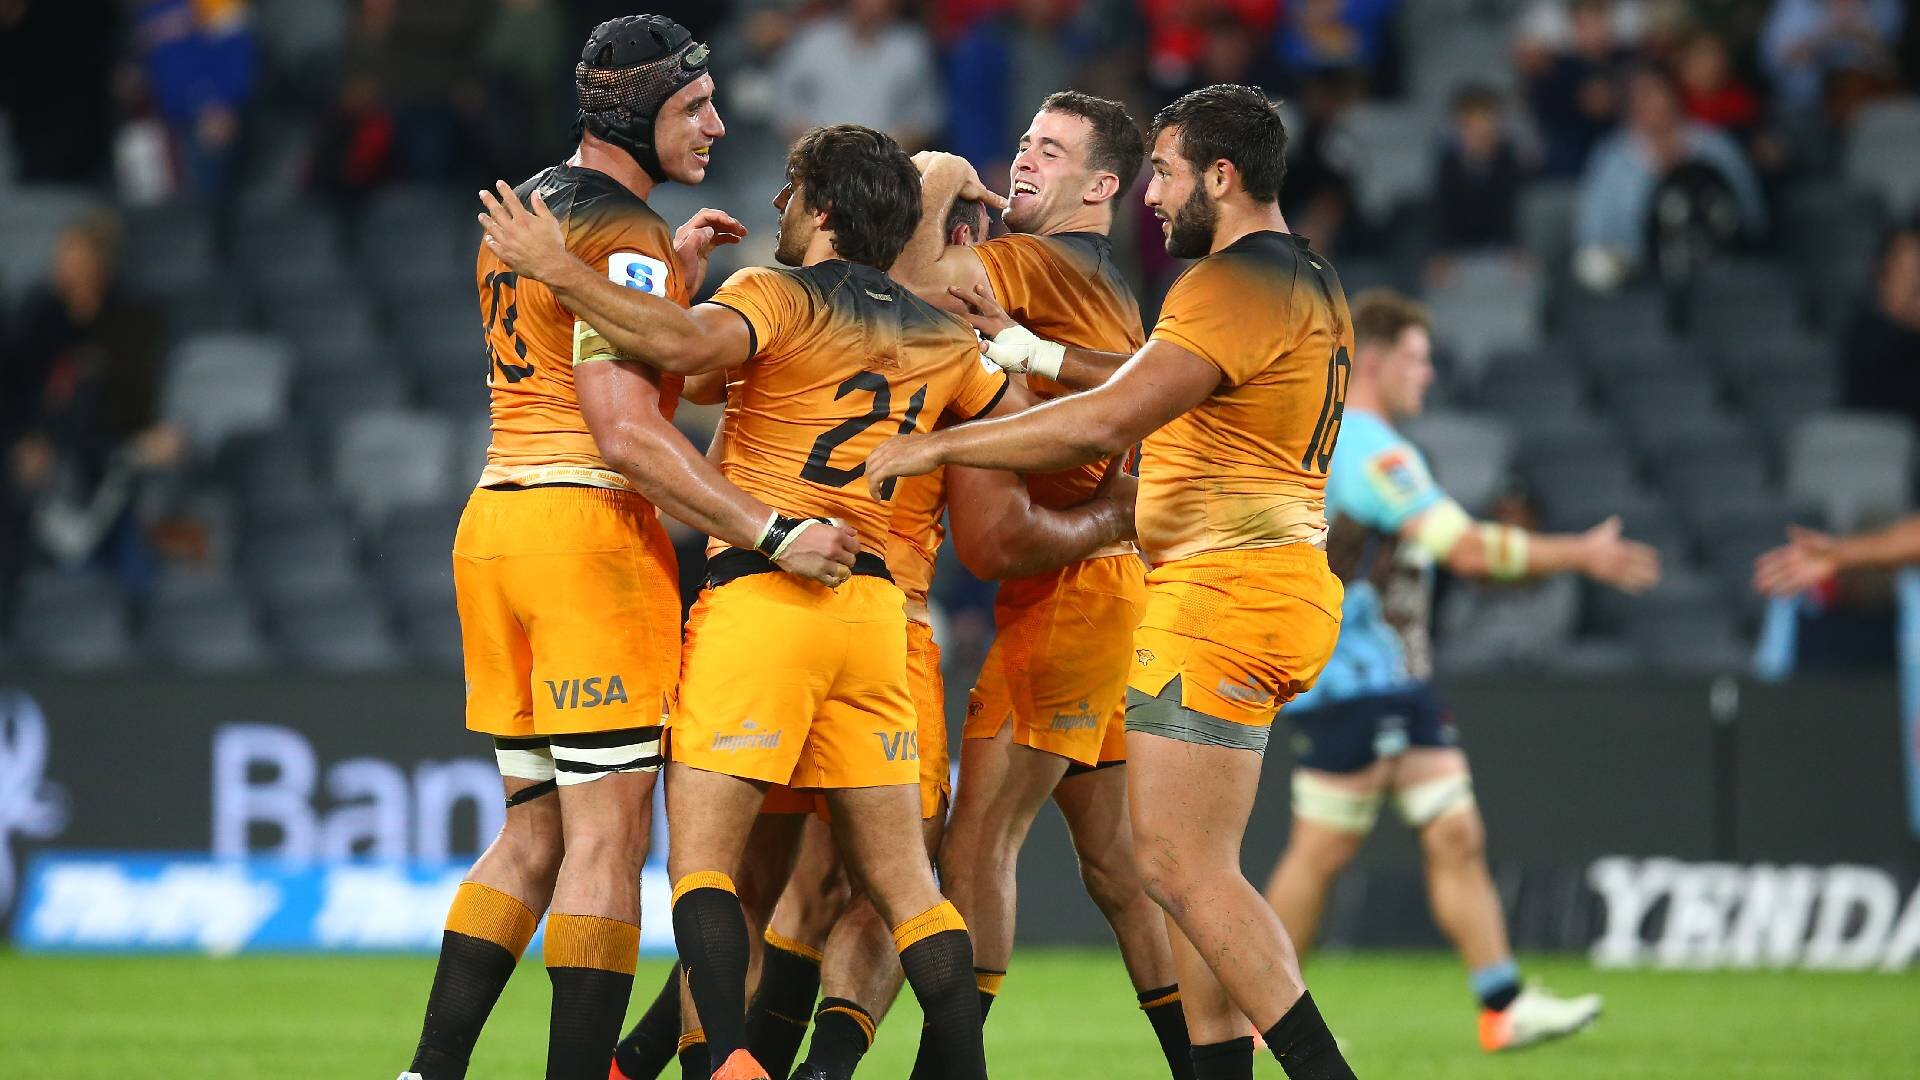 'They're the national team, they shouldn't even be in the comp' - Wallabies great calls for Jaguares to be booted from Super Rugby